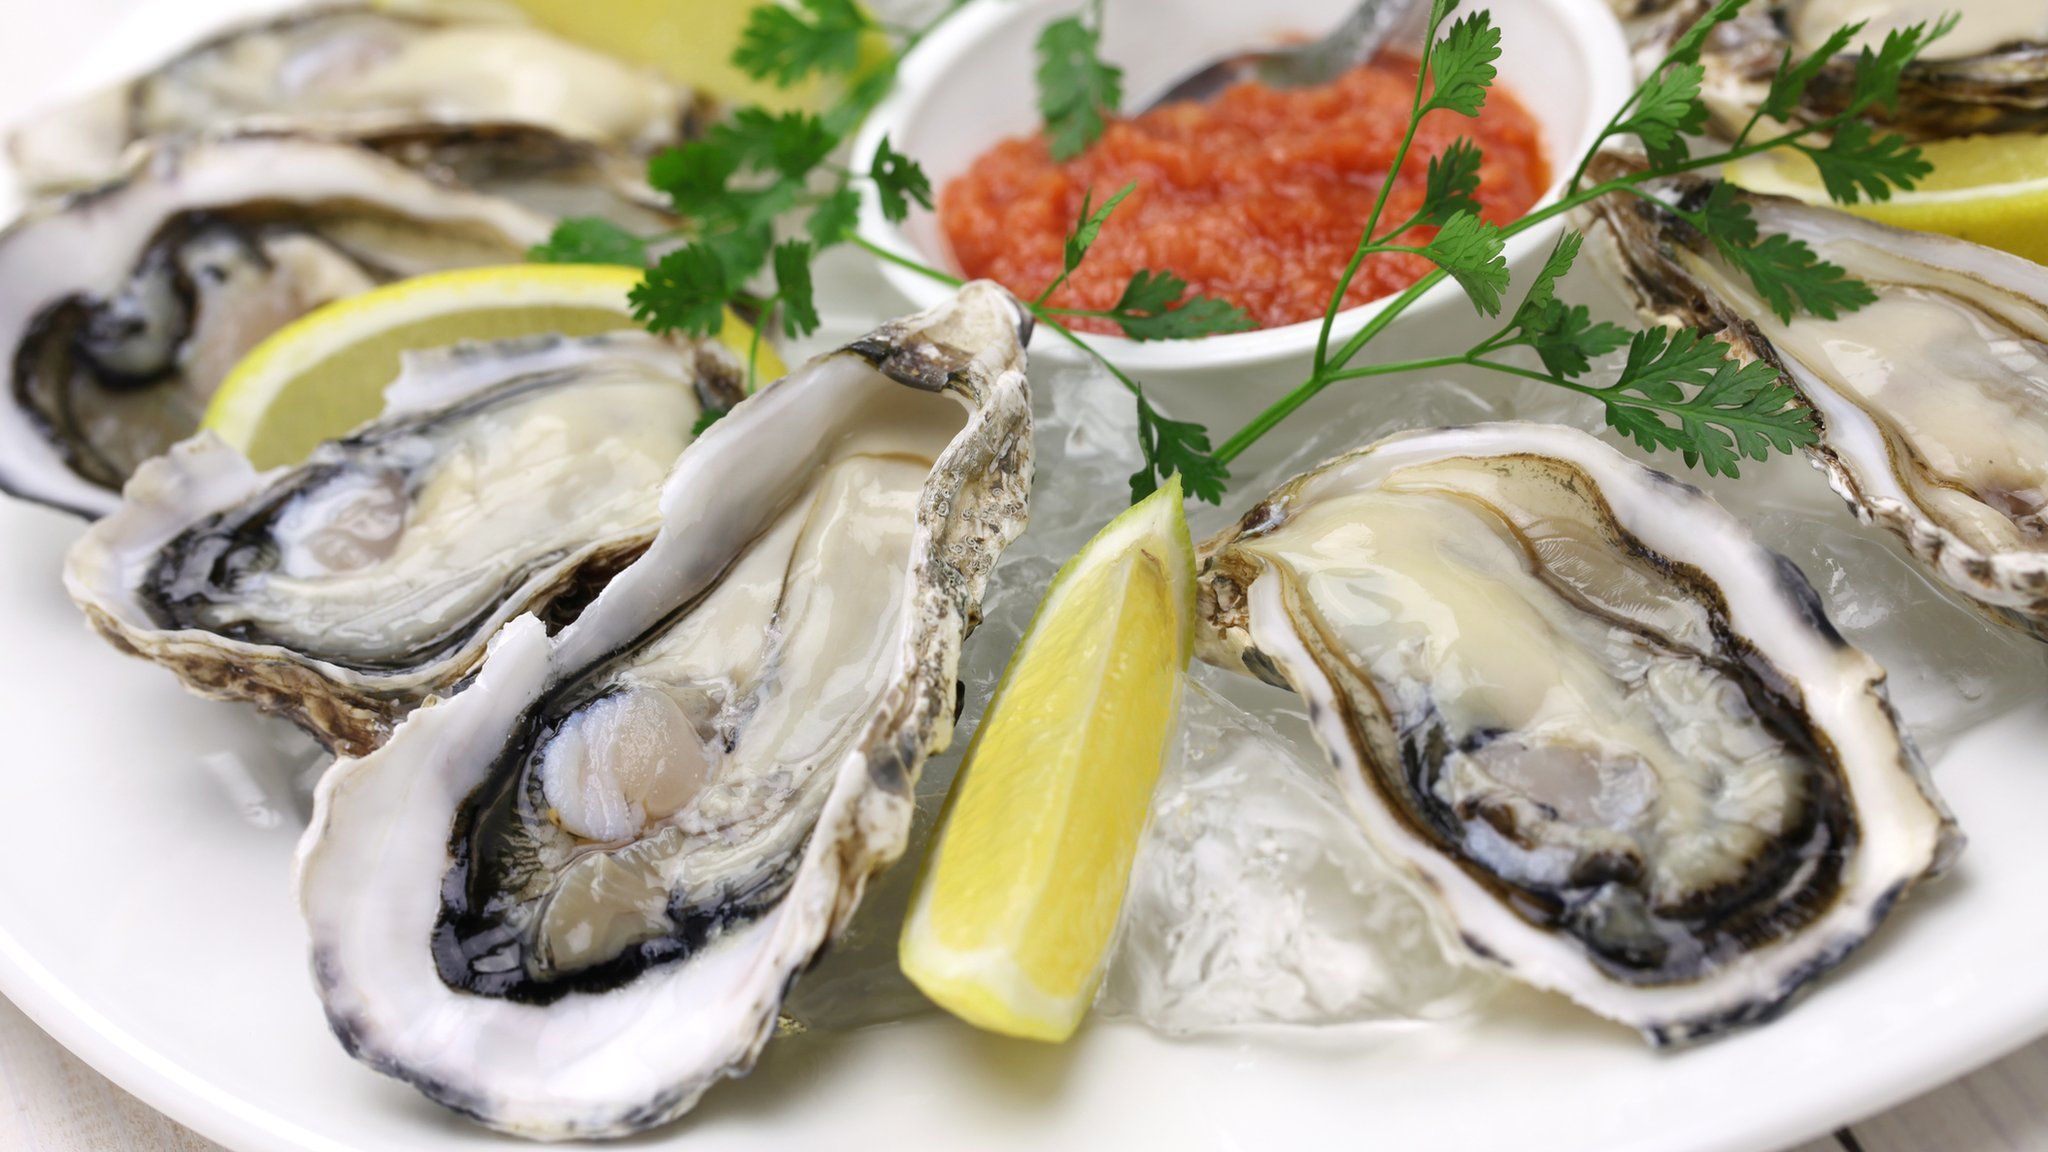 A dish of oysters